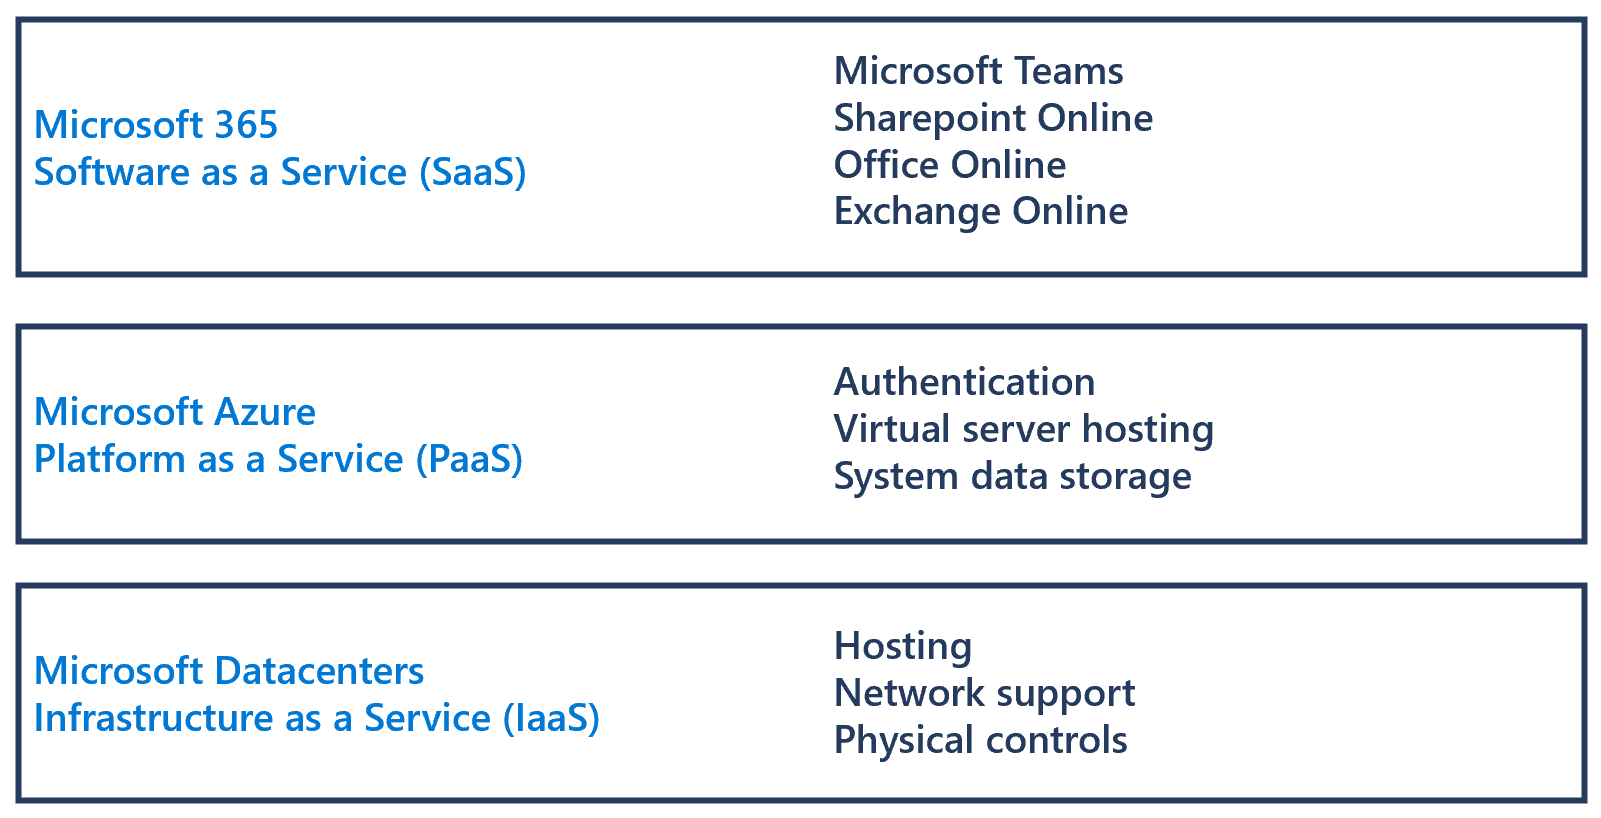 Diagram showing the differences between Microsoft 3 65 Software as a Service, Microsoft Azure Platform as a Service, and Microsoft Datacenters Infrastructure as a Service.